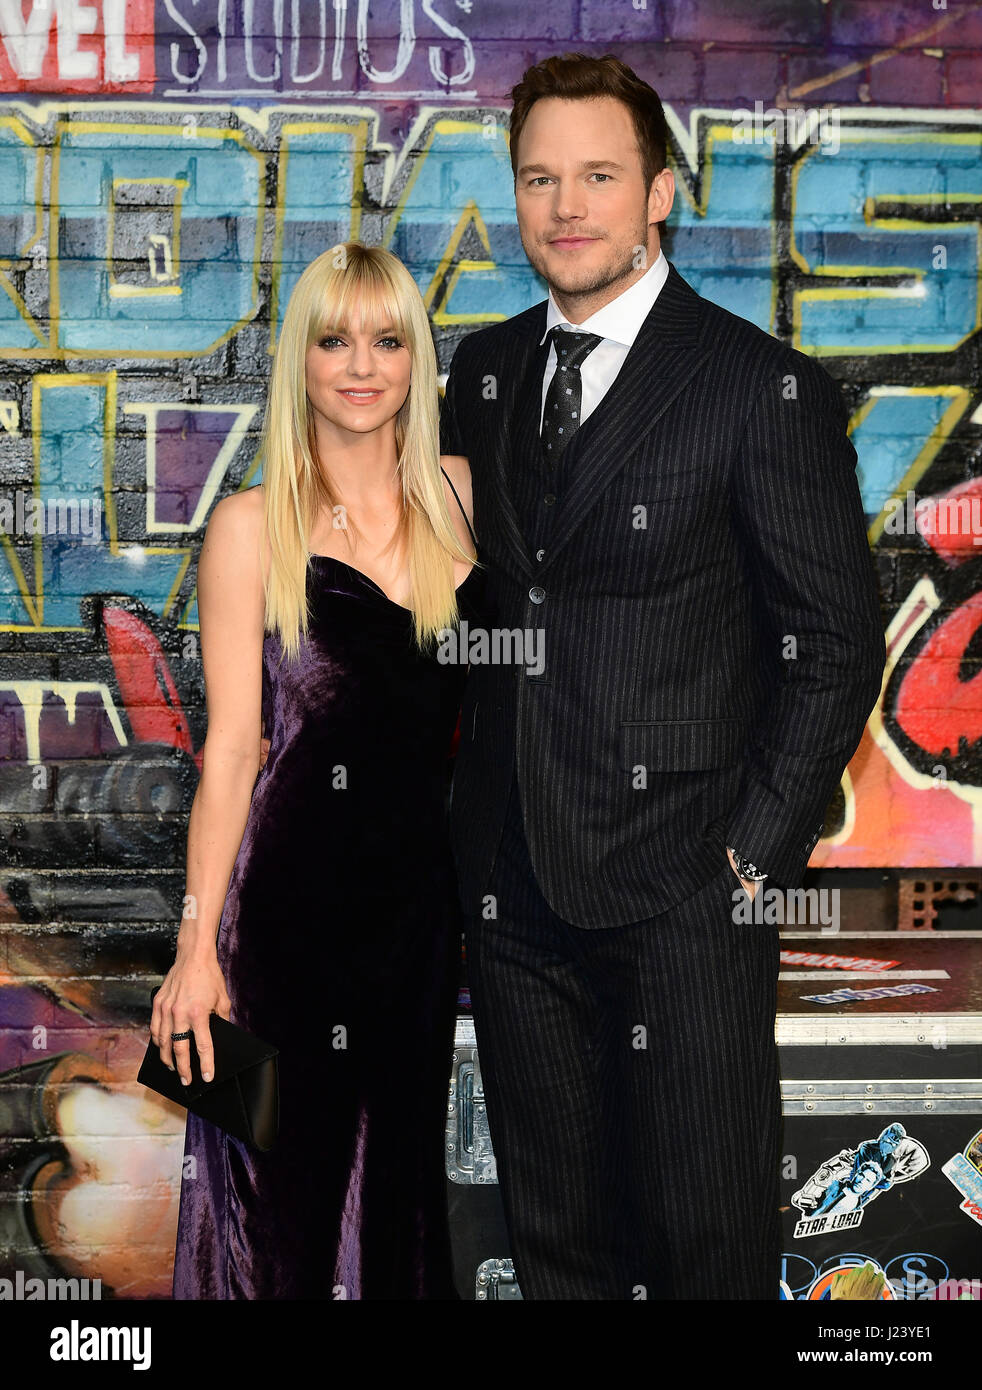 Chris Pratt and Anna Faris attending The European Premiere of Guardians of the Galaxy Vol. 2 held at the Eventim Apollo, London. Stock Photo